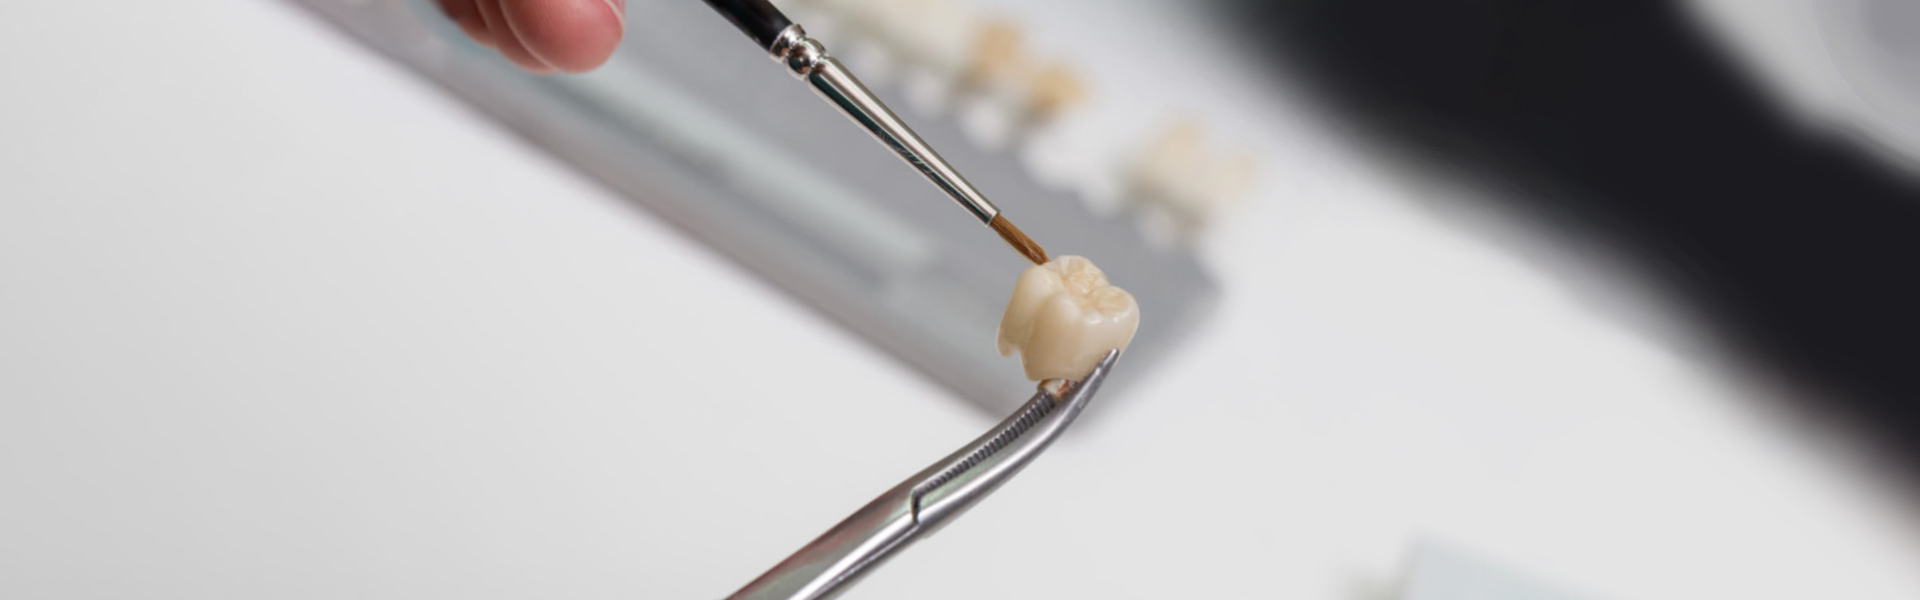 WHAT TO KNOW ABOUT  DENTAL CROWNS AND DENTAL BRIDGES?